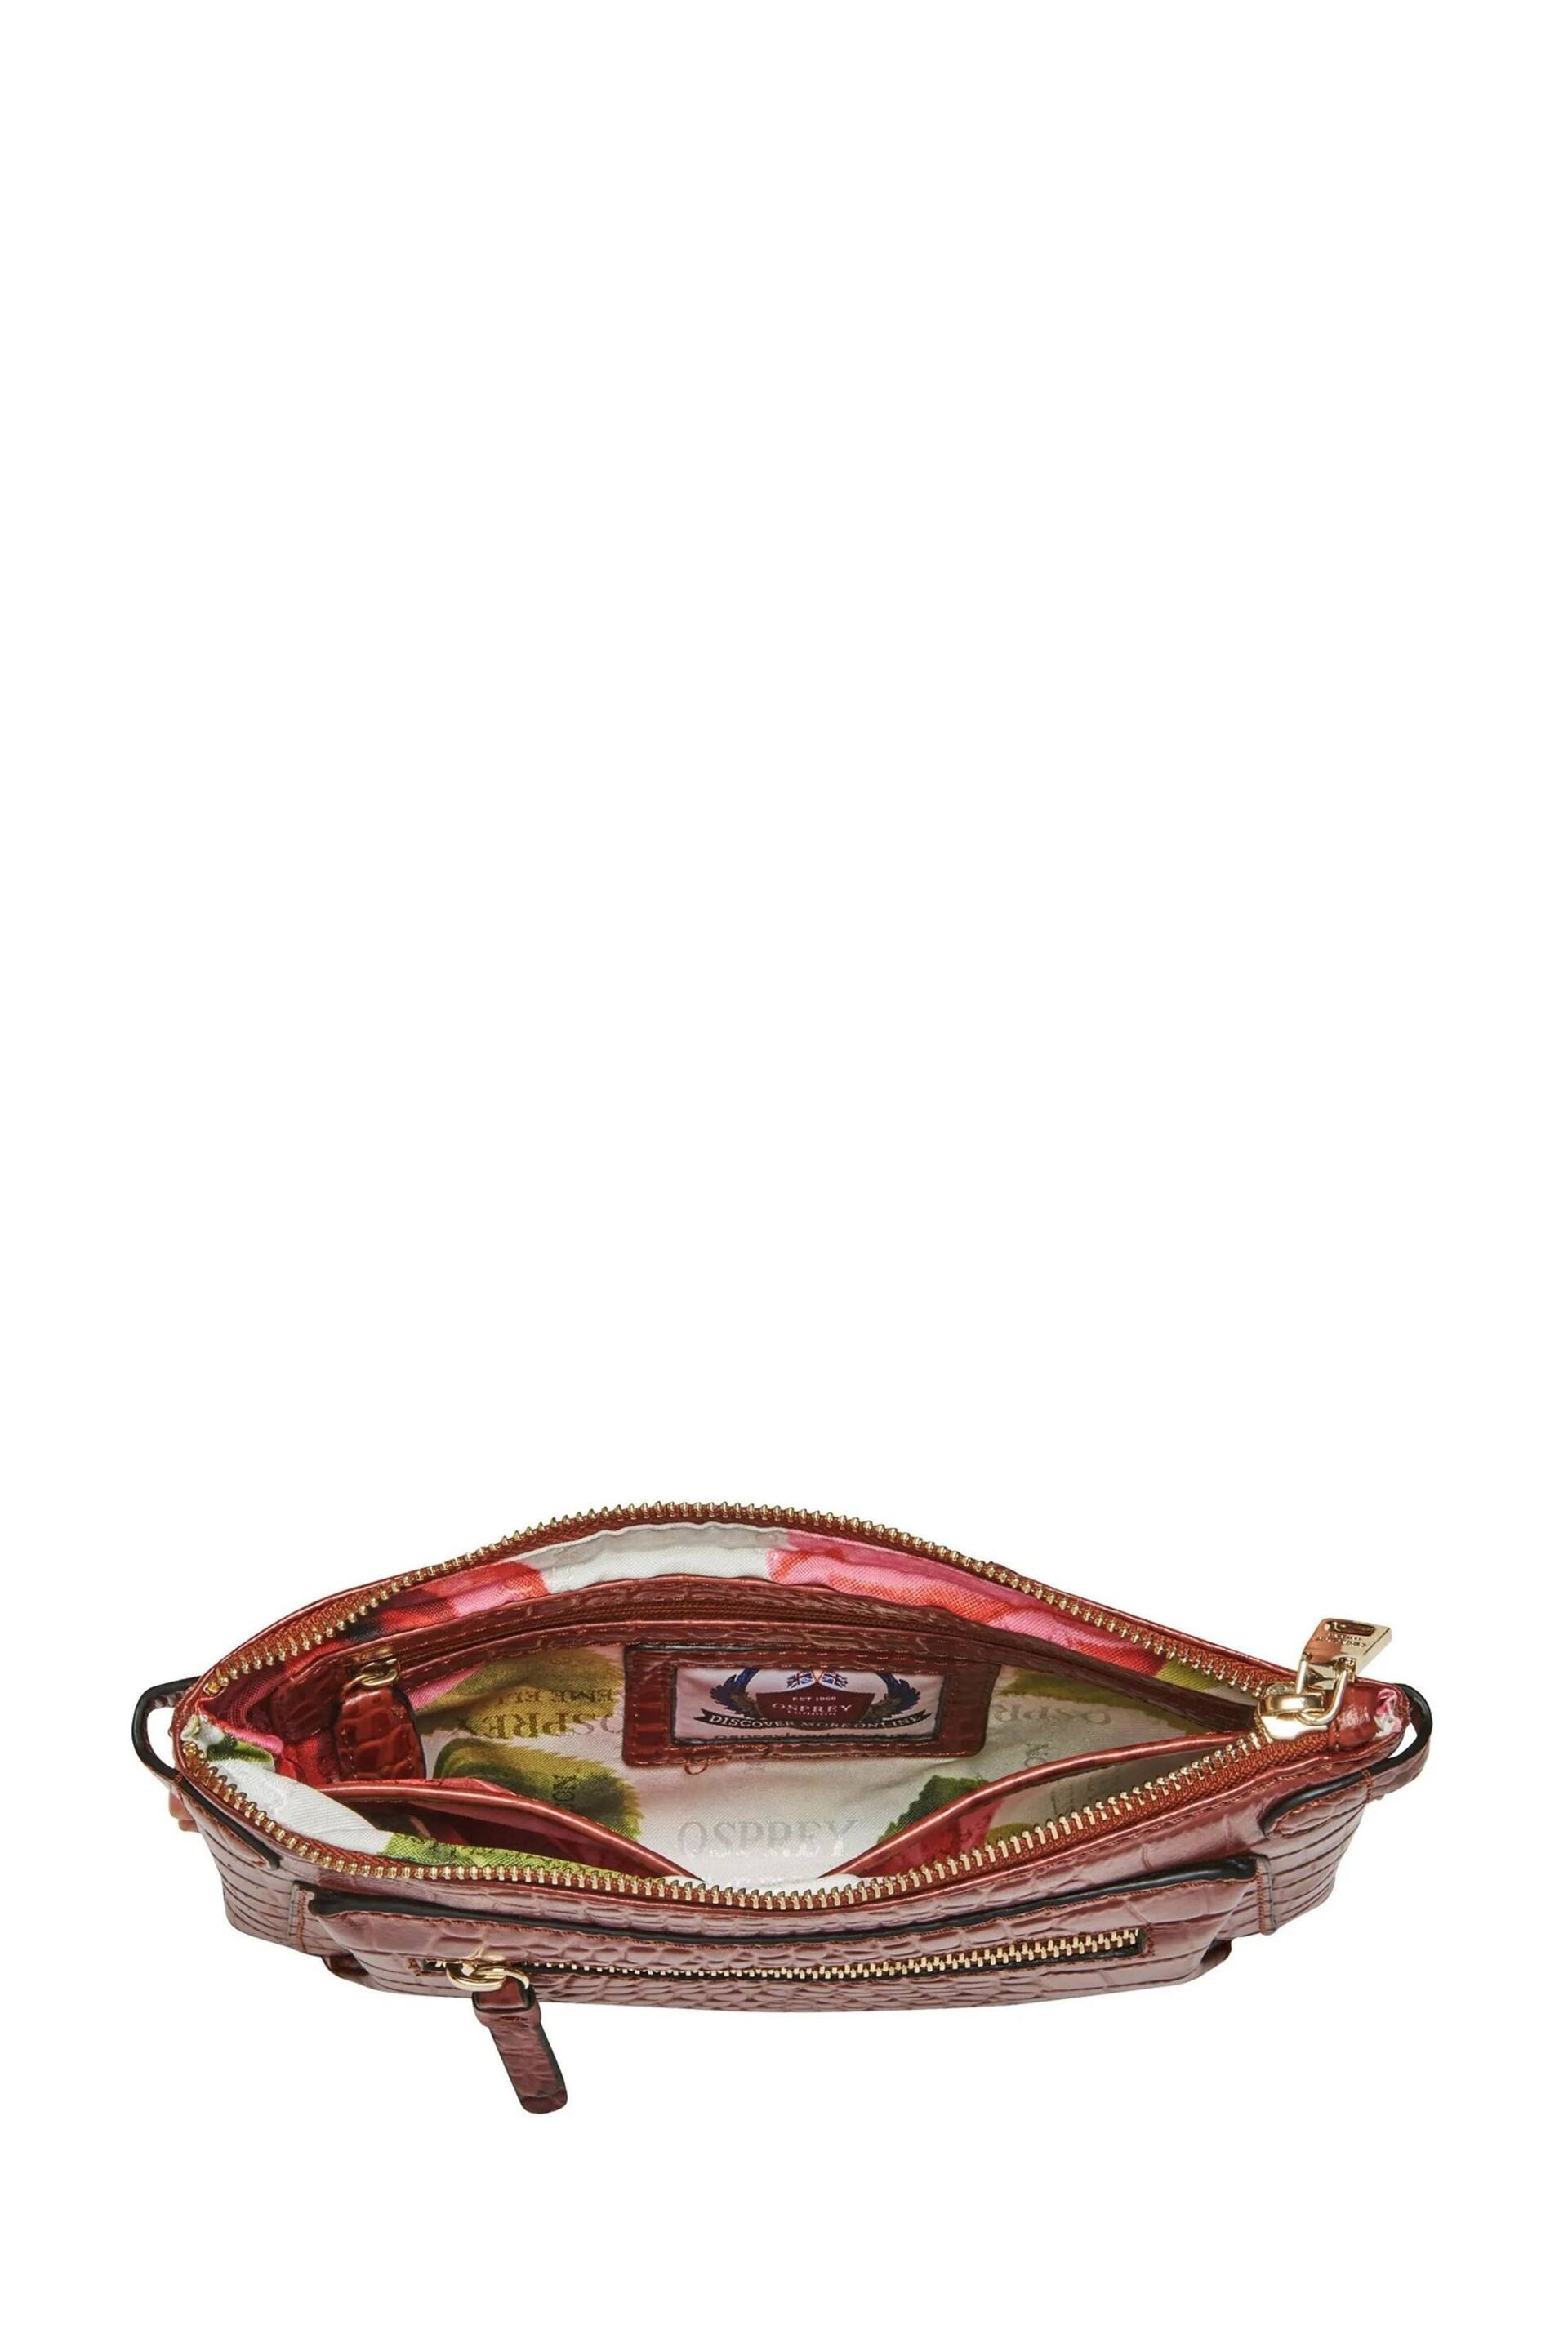 Osprey London  The Ruby Leather Cross-Body Cognac Clutch - Image 5 of 6